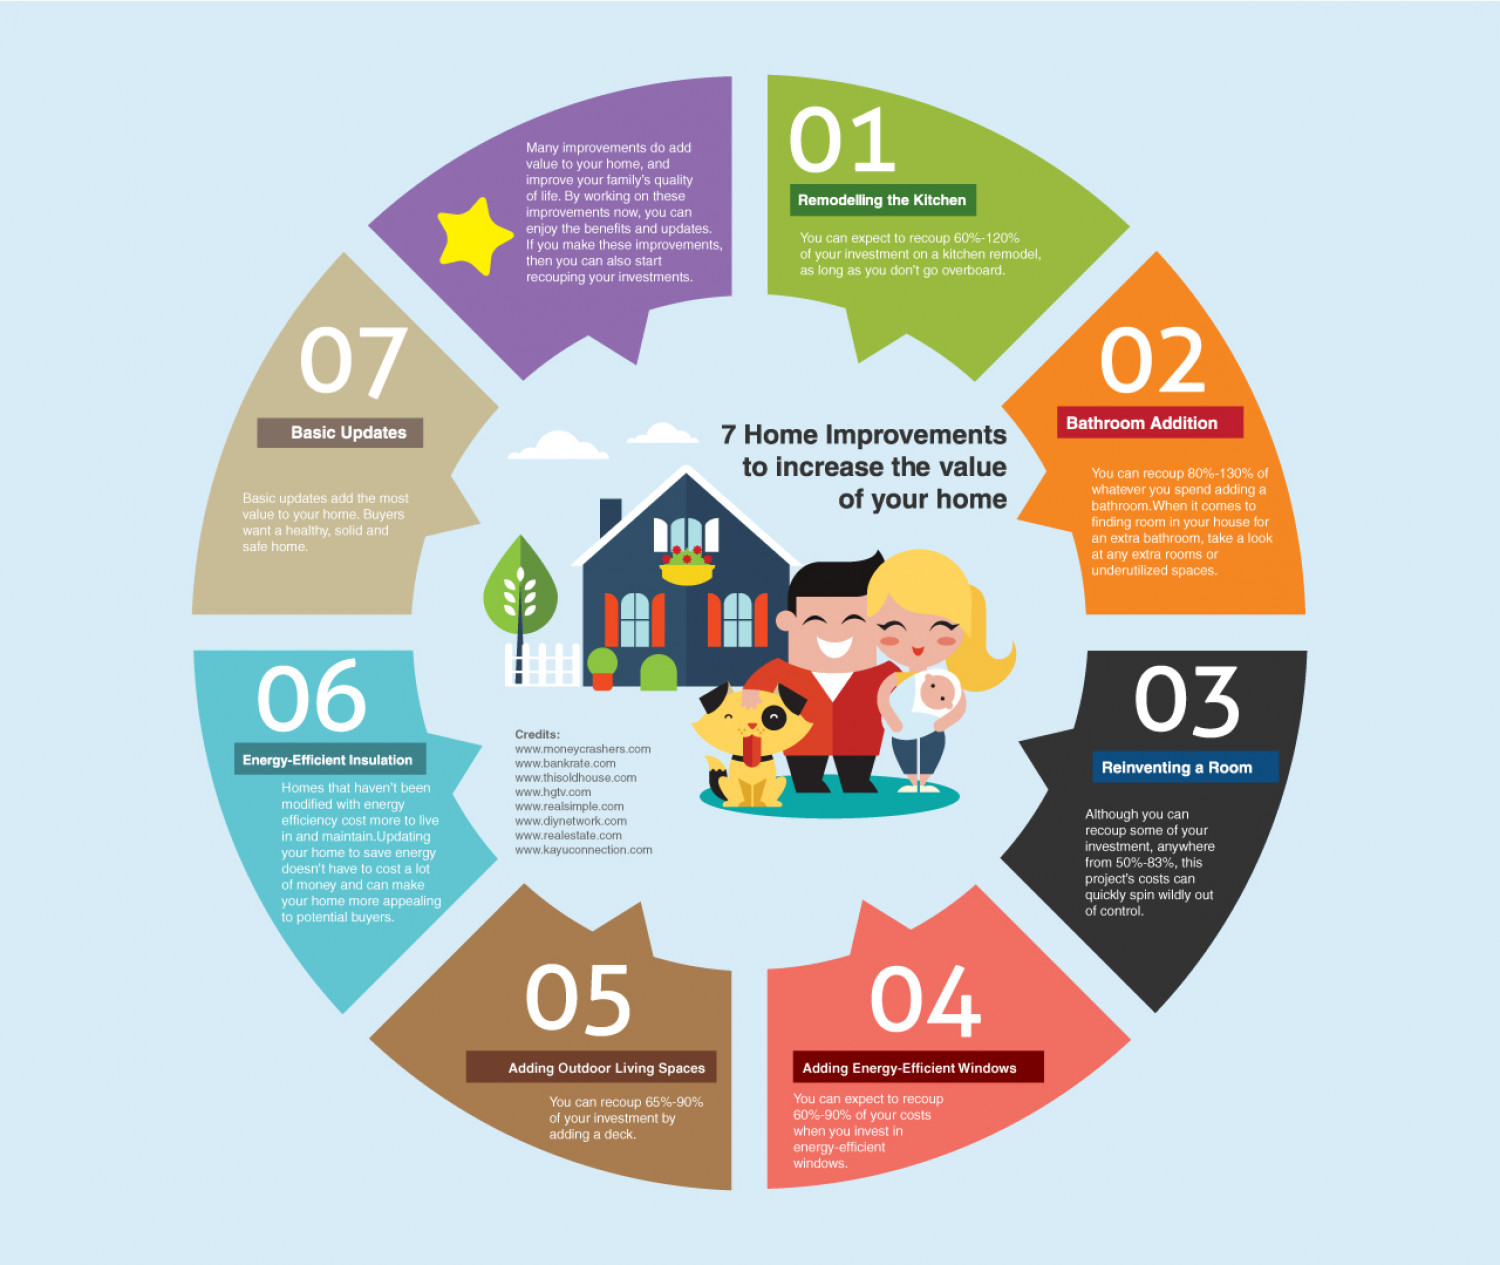 Home Improvement & Remodeling Ideas to Increase Home Value Infographic